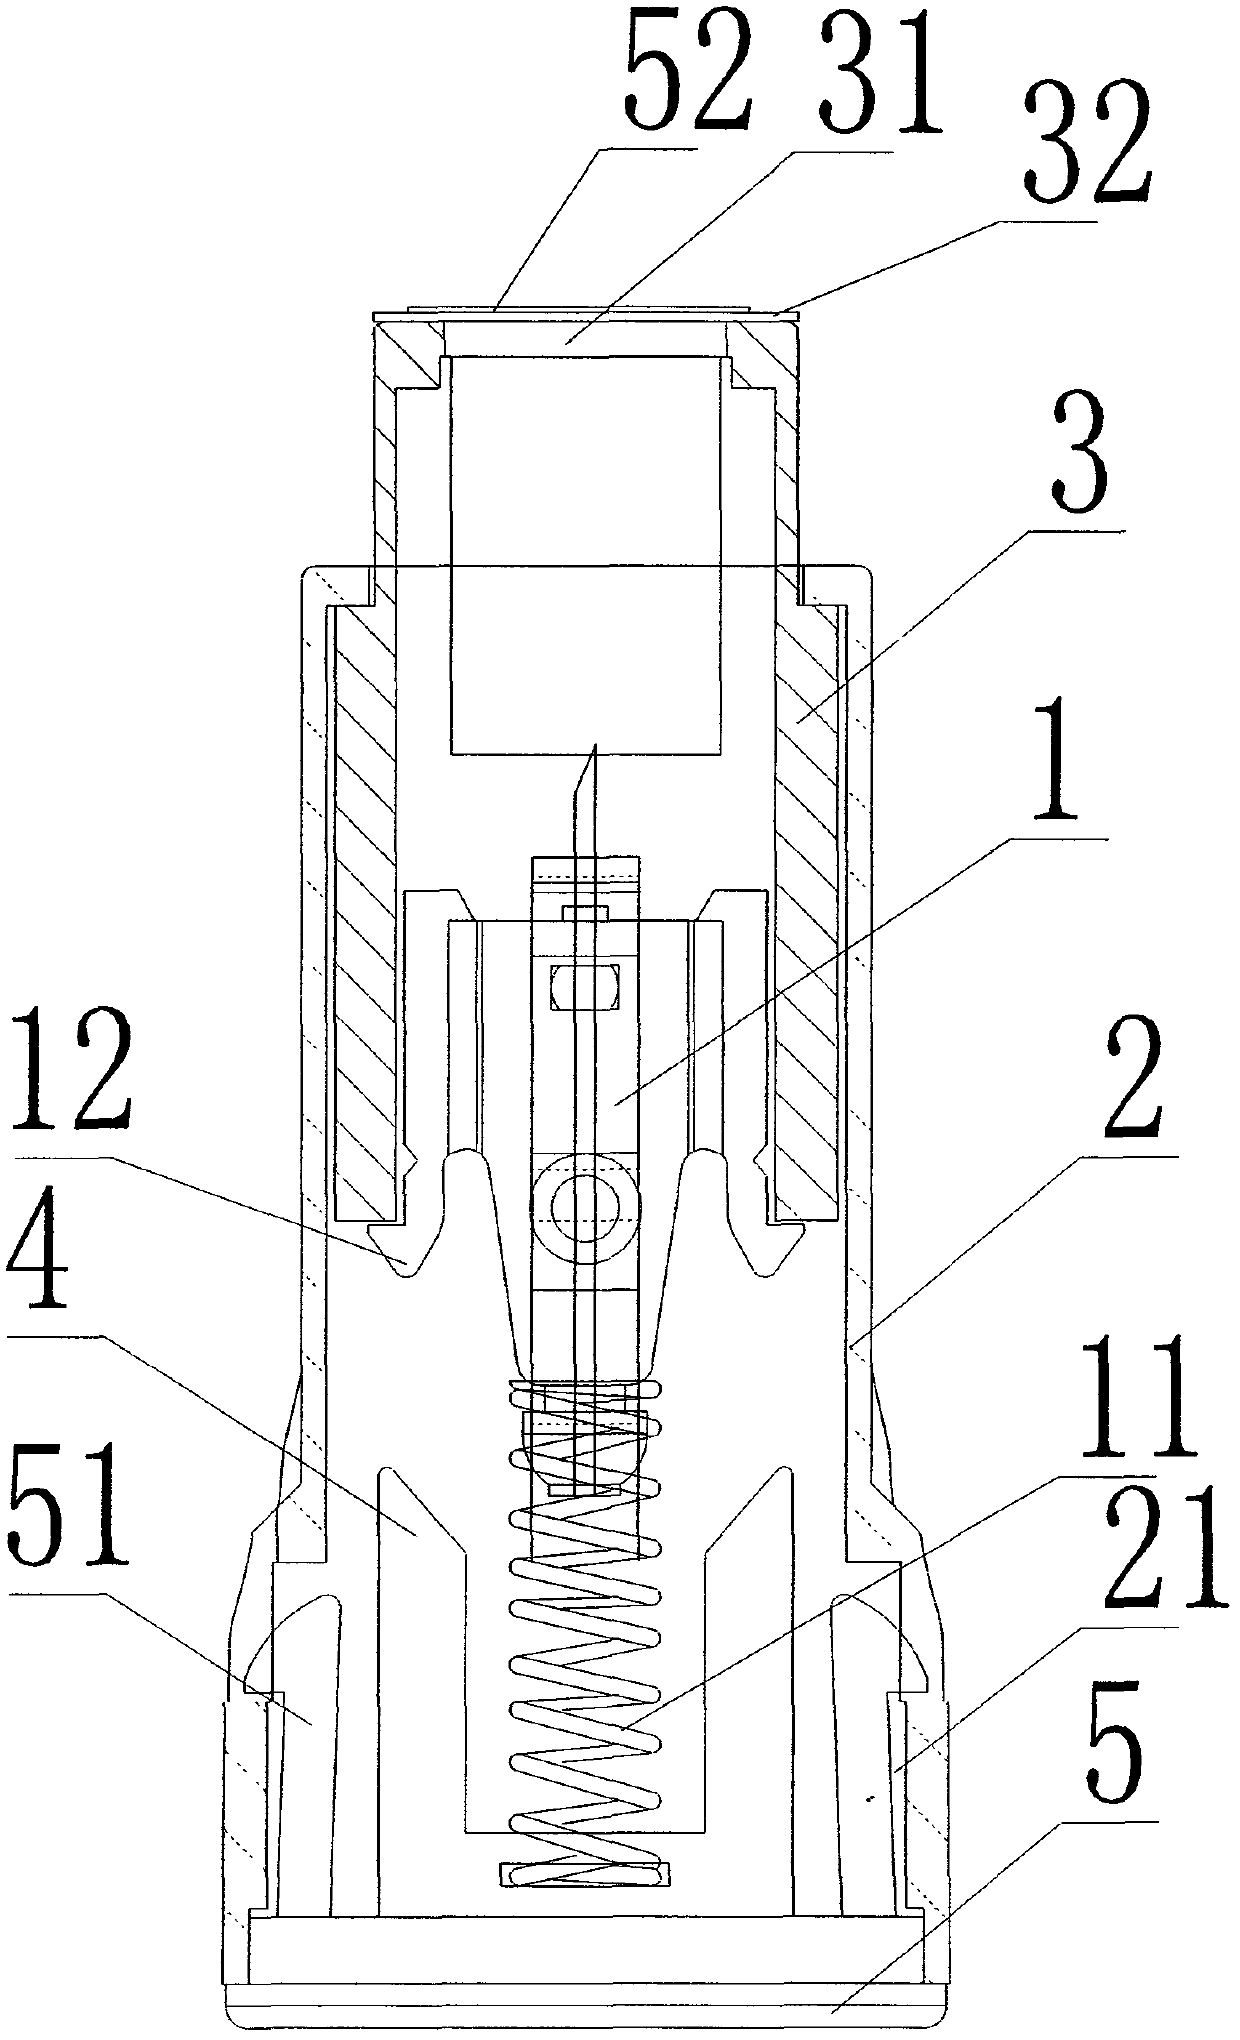 Disposable blood sampling device with pre-coded two-dimensional barcodes